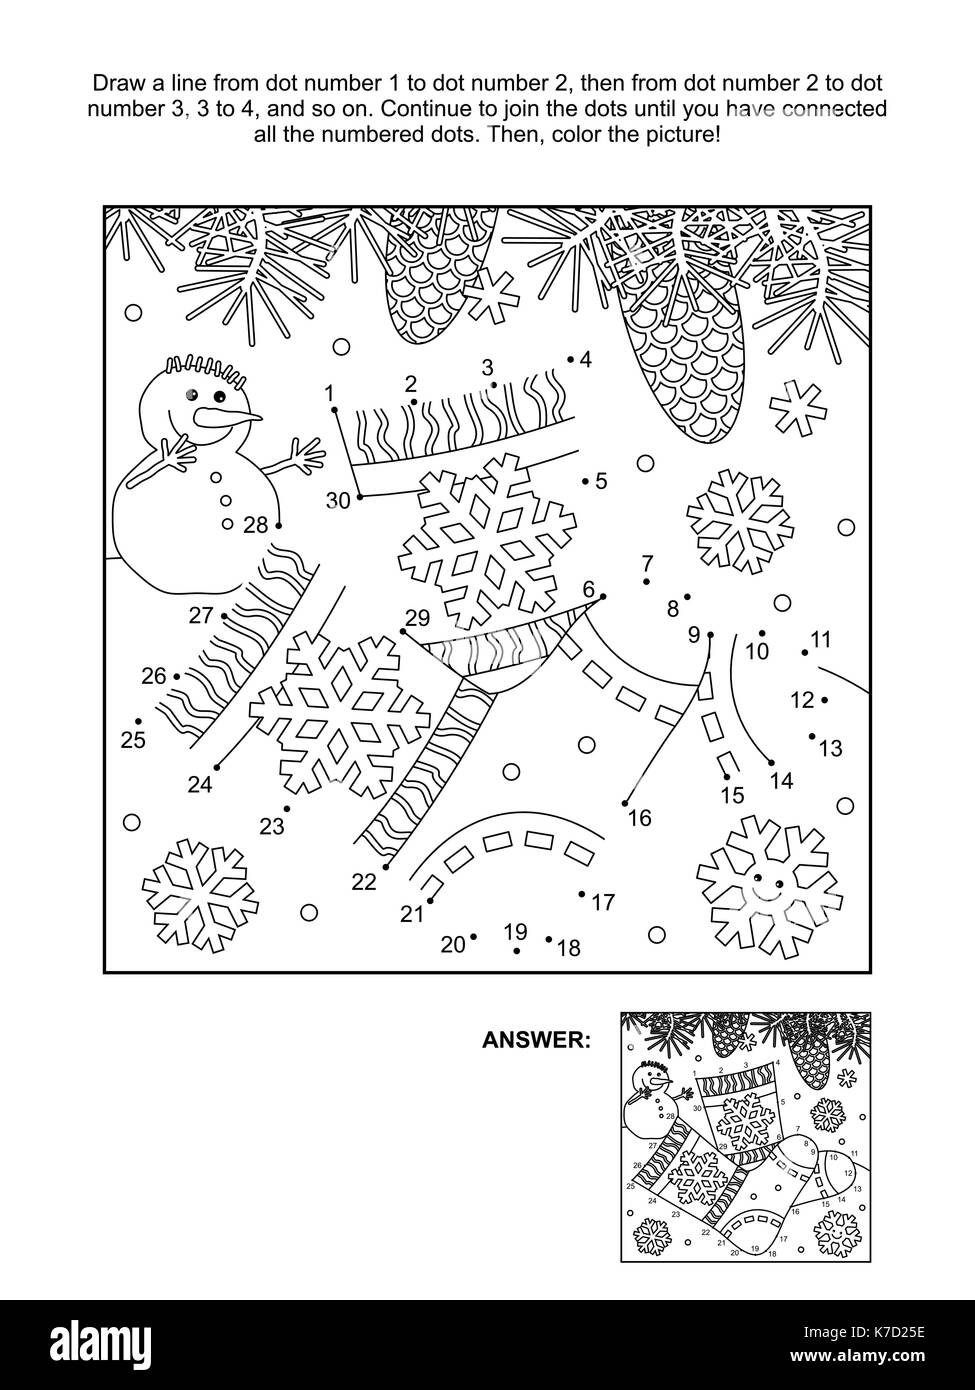 Winter or winter holidays themed connect the dots picture puzzle and coloring page with knitted socks. Answer included. Stock Vector